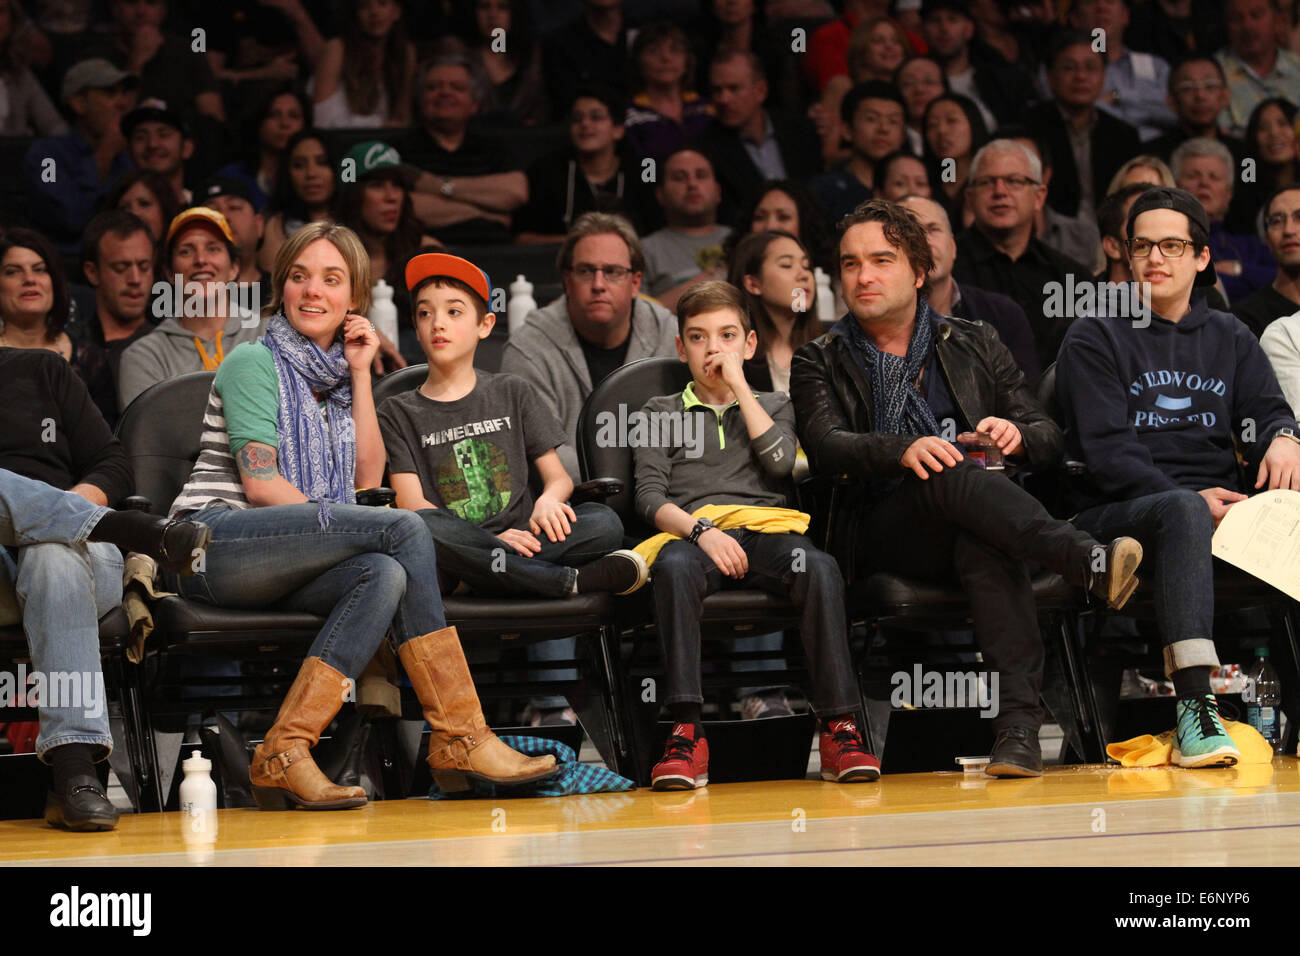 Celebrities courtside at the Lakers game. The Los Angeles Lakers defeated  the Boston Celtics by the score of 101-92 at Staples Center Featuring:  Floyd Mayweather Jr. Where: Los Angeles, California, United States